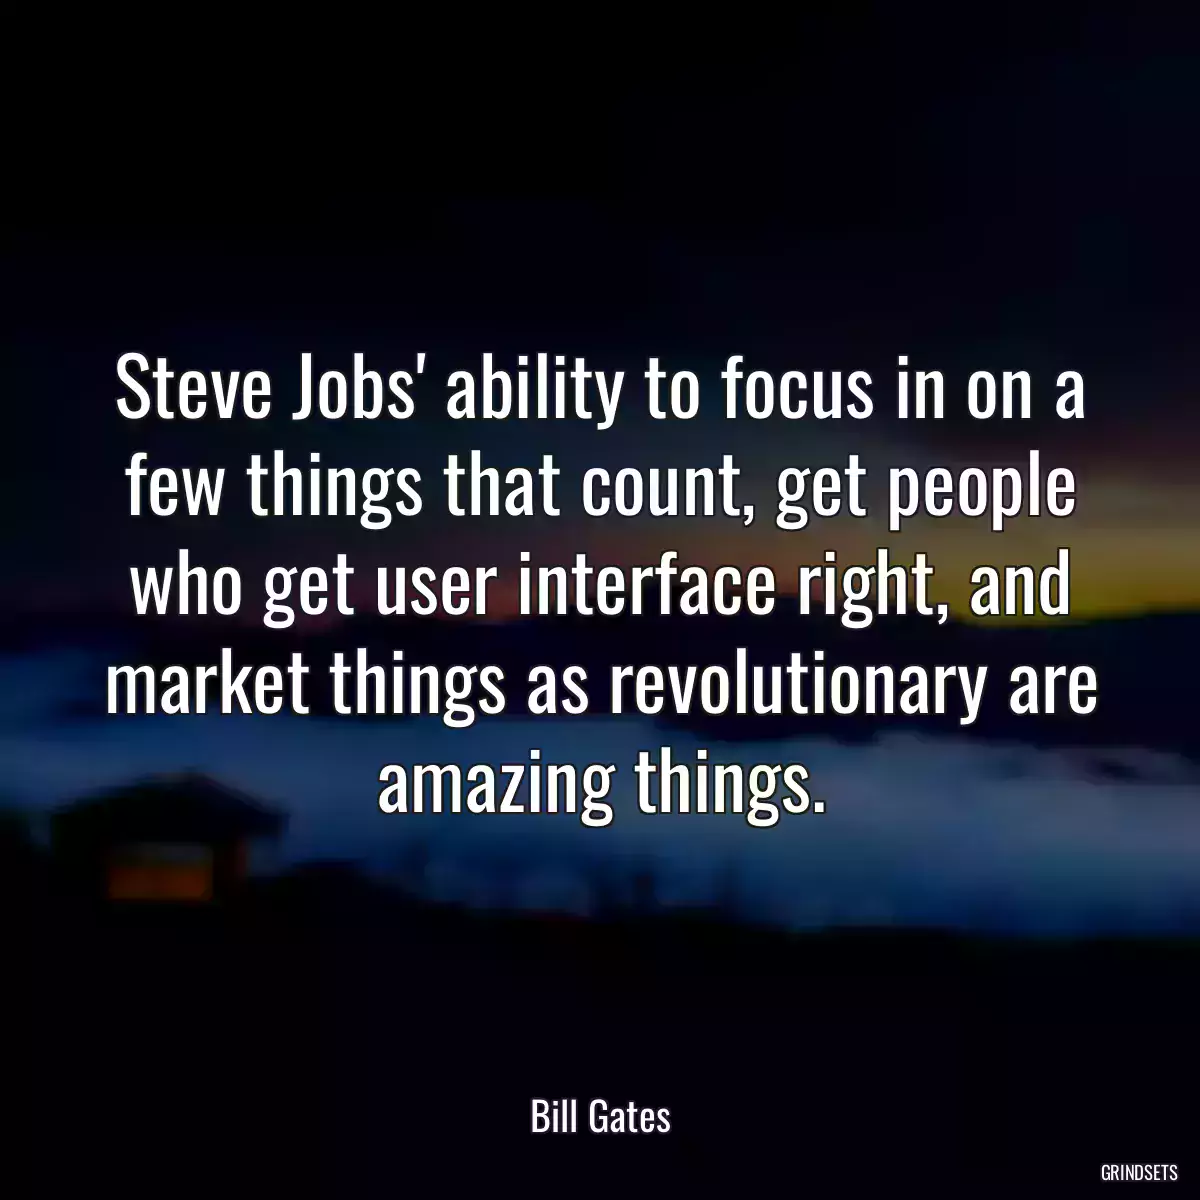 Steve Jobs\' ability to focus in on a few things that count, get people who get user interface right, and market things as revolutionary are amazing things.